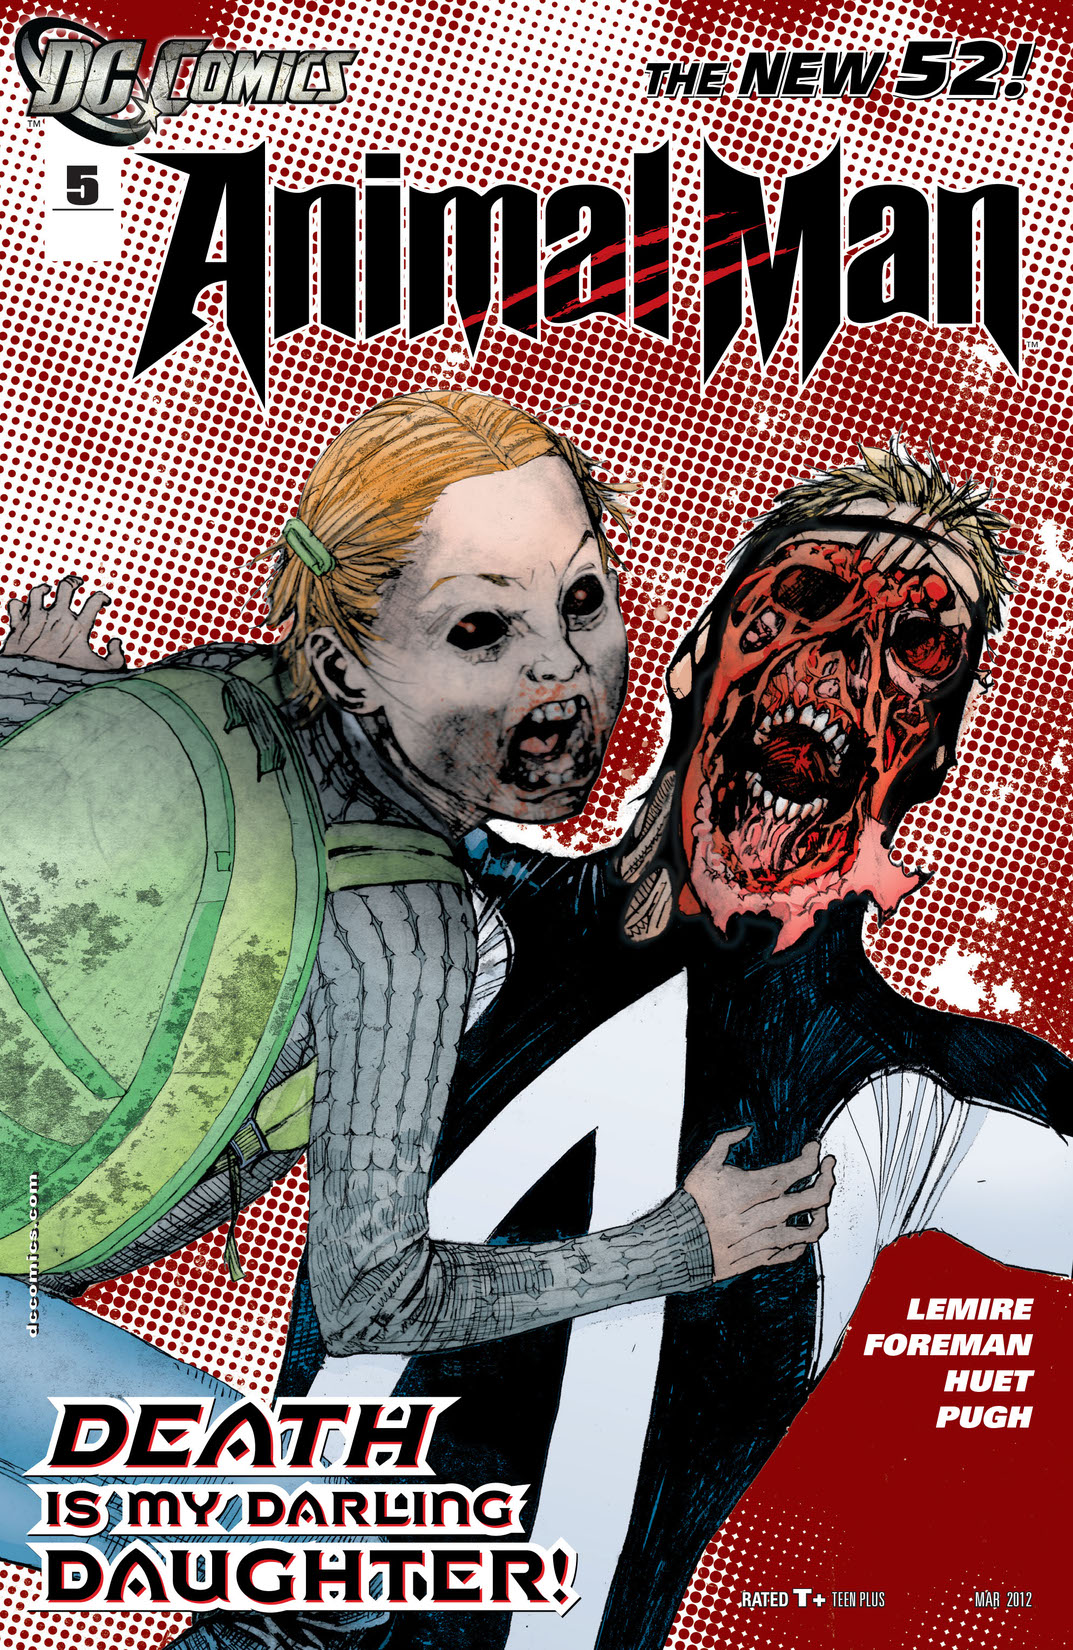 Animal Man (2011-) #5 preview images